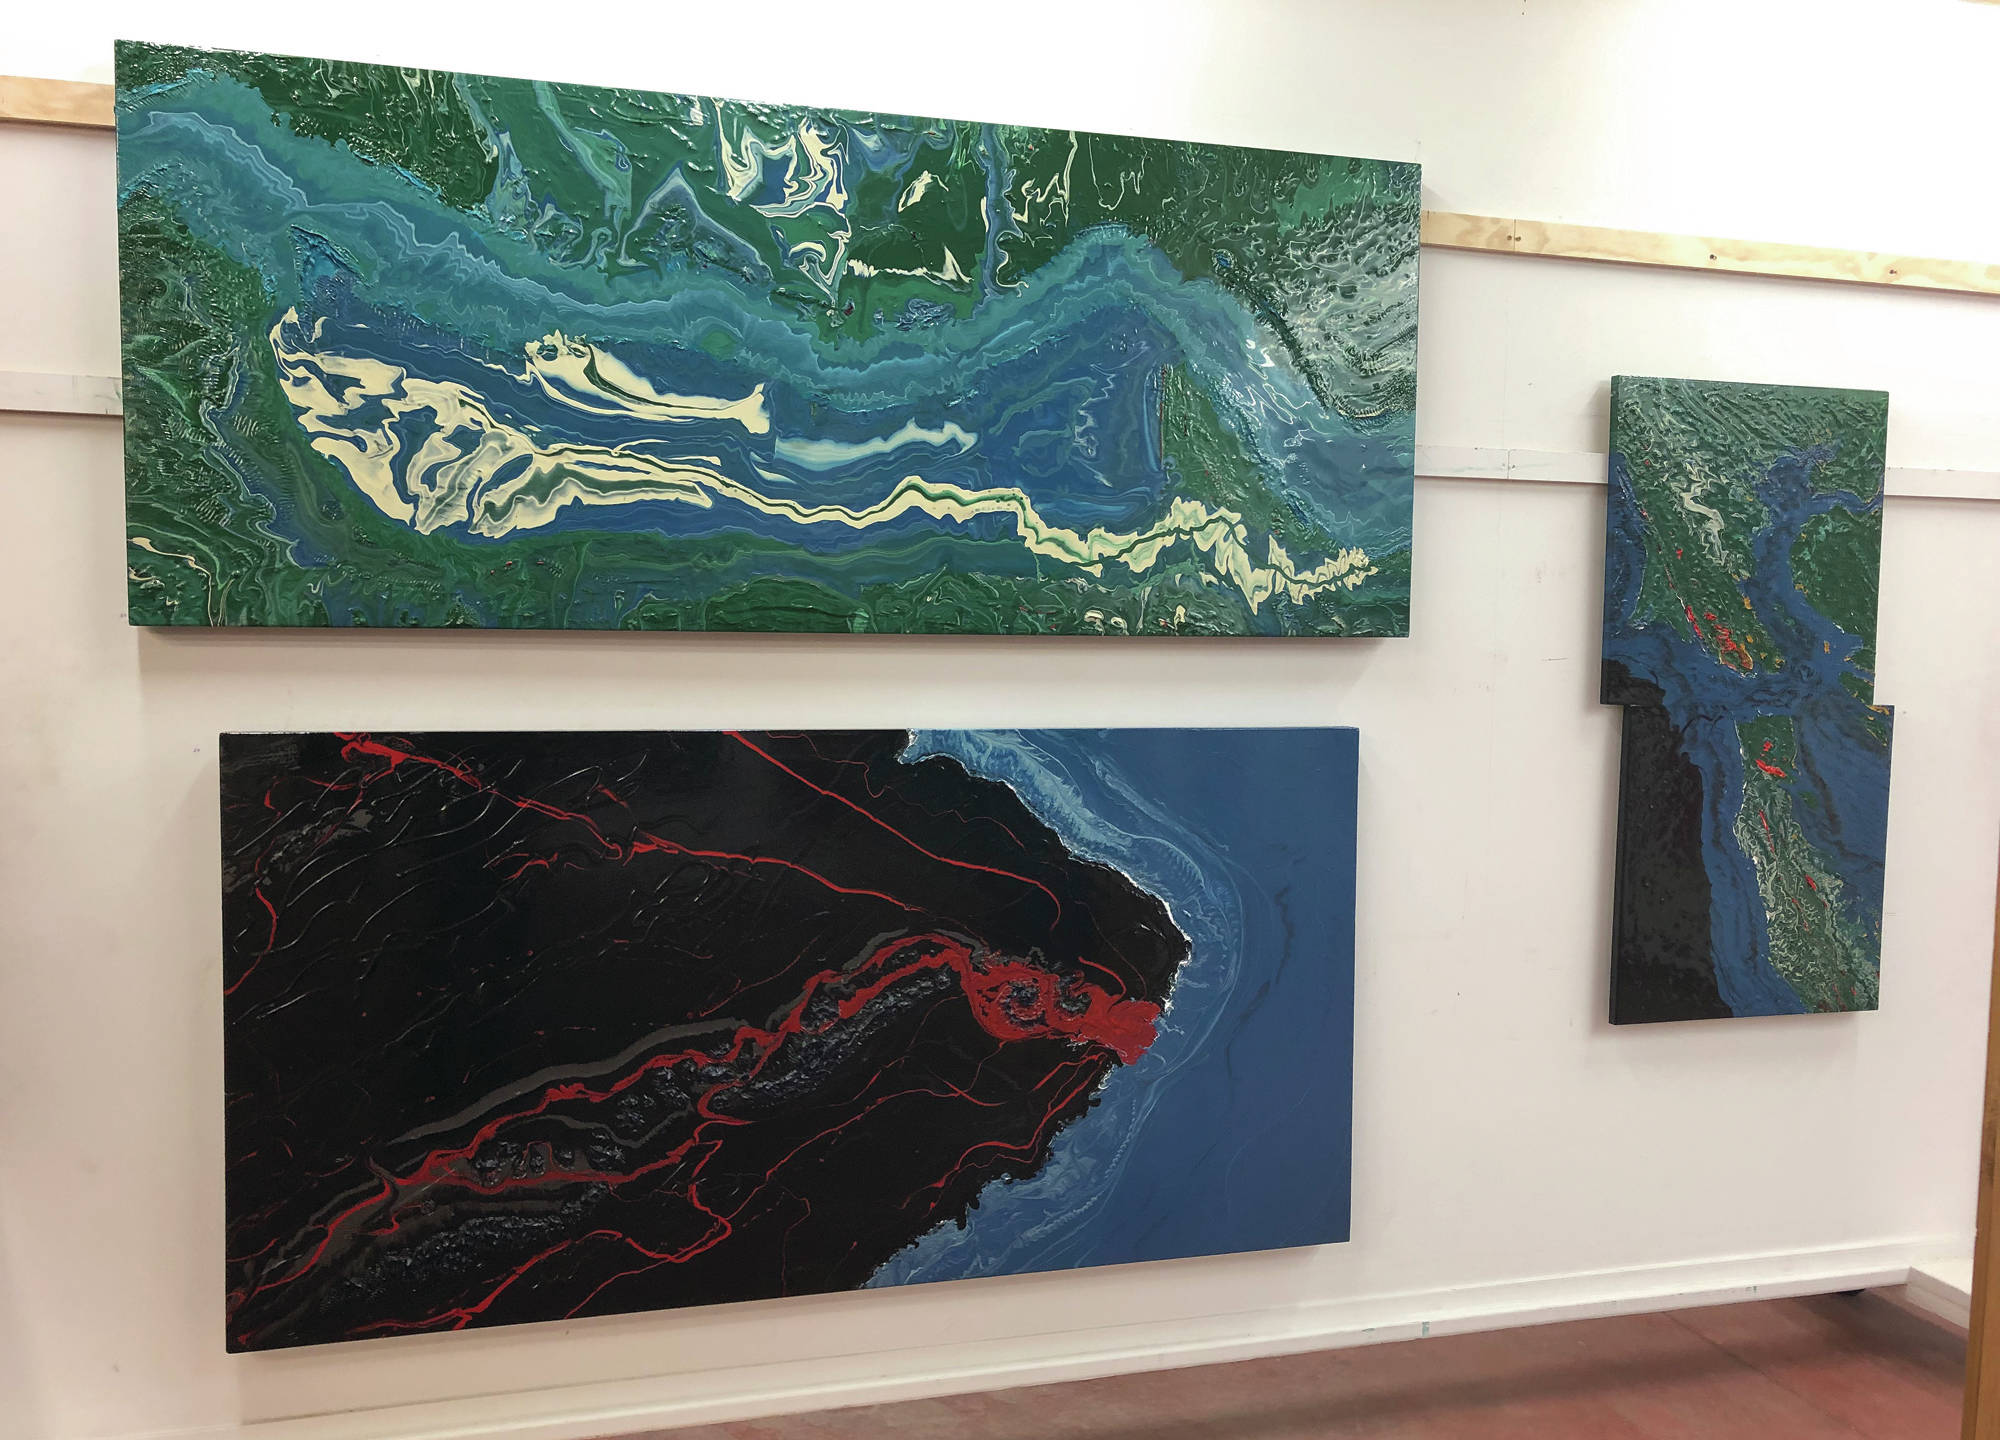 Paintings by Spelman Evans Downer sit on display at the Ecotopia North Painting Exhibition at the Gallery Turquoise North at mile 49.5 of the Sterling Highway in Cooper Landing. (Photo provided by Sara Frantz)